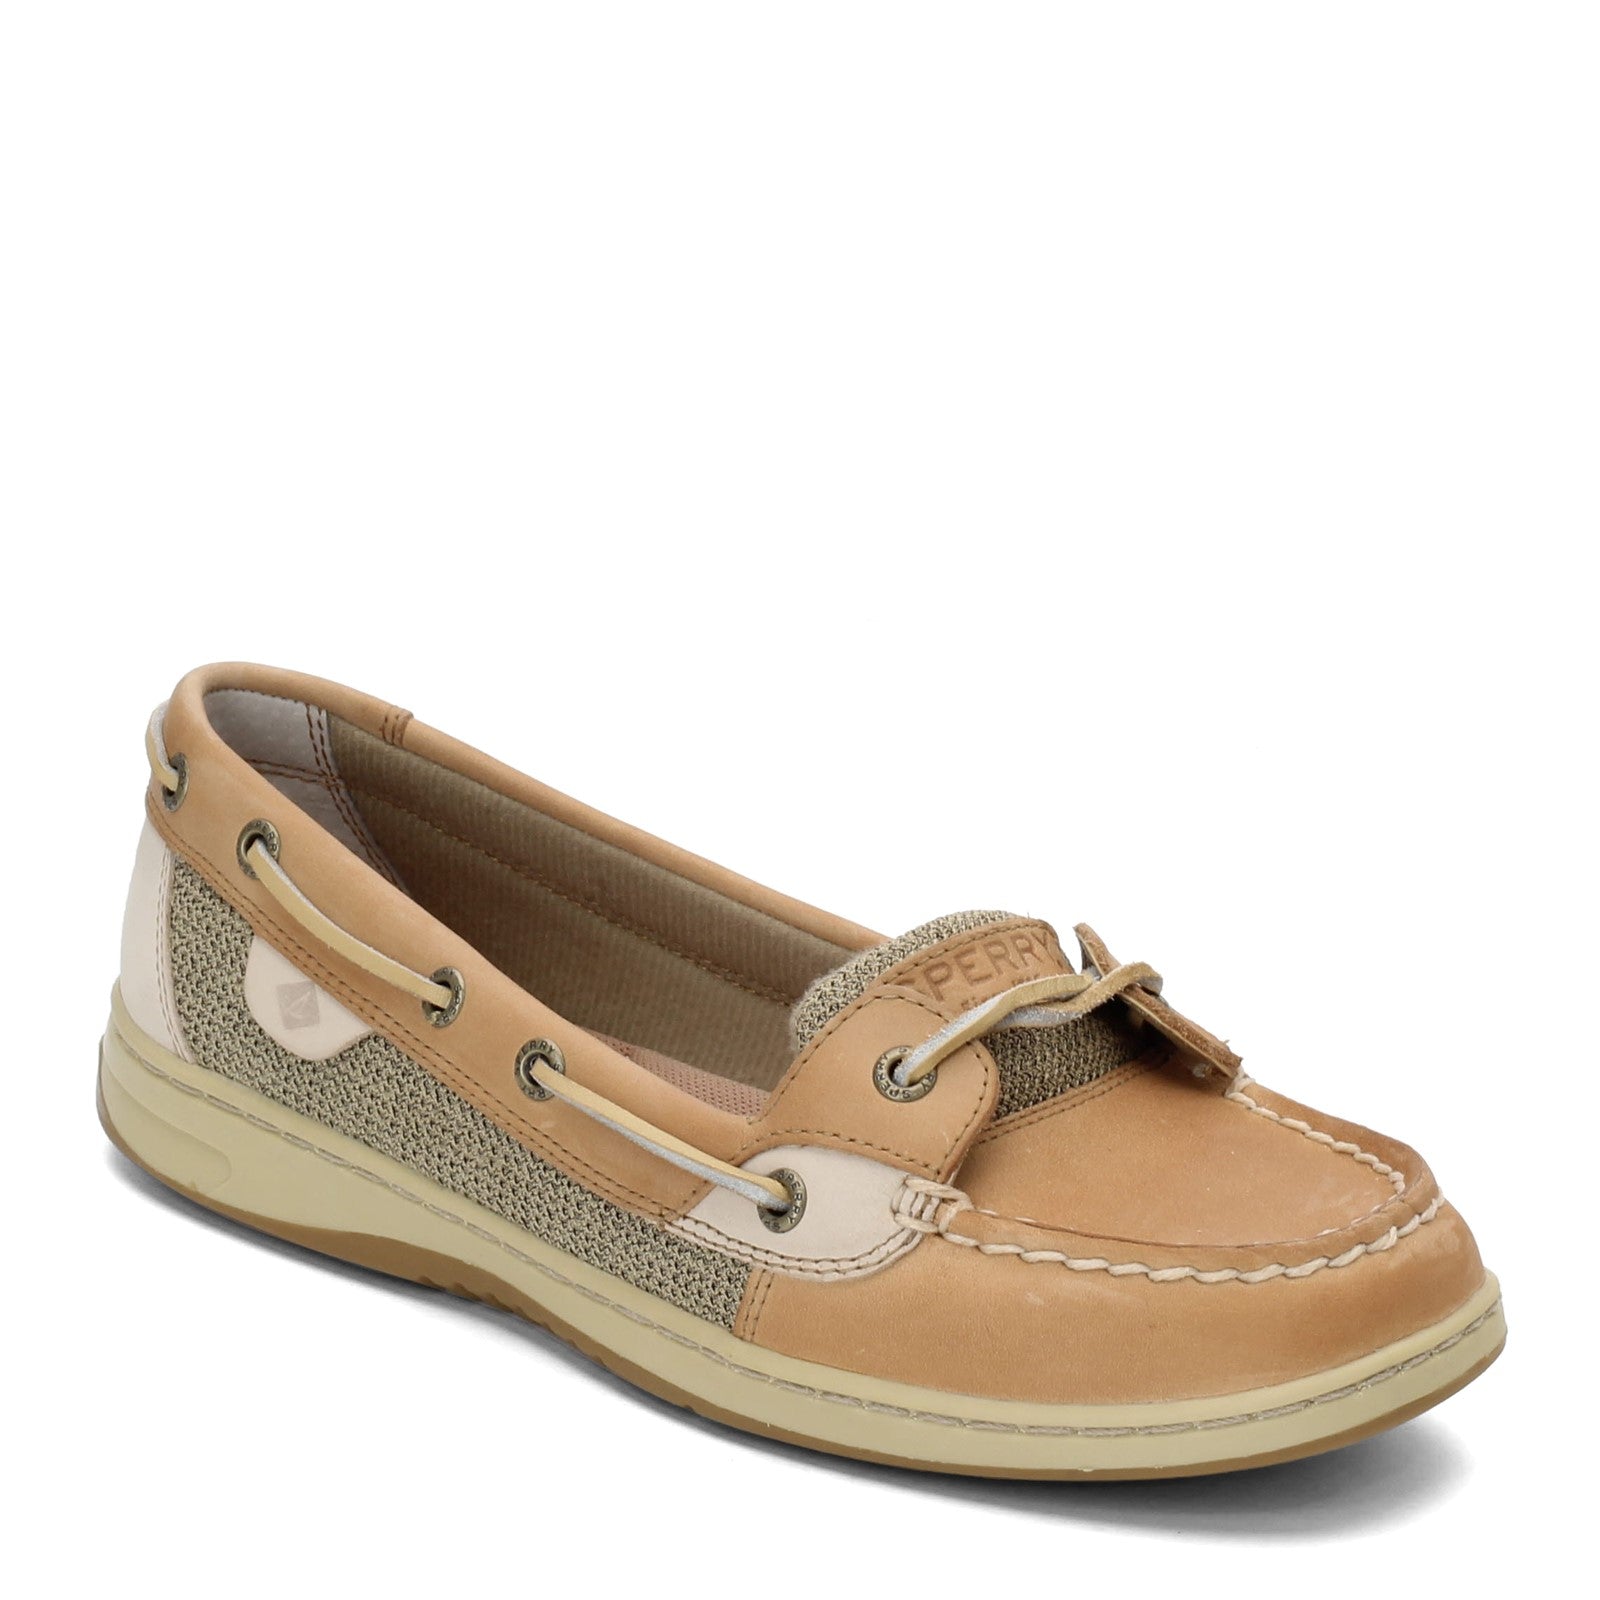 How to Relace Sperry Boat Shoes 